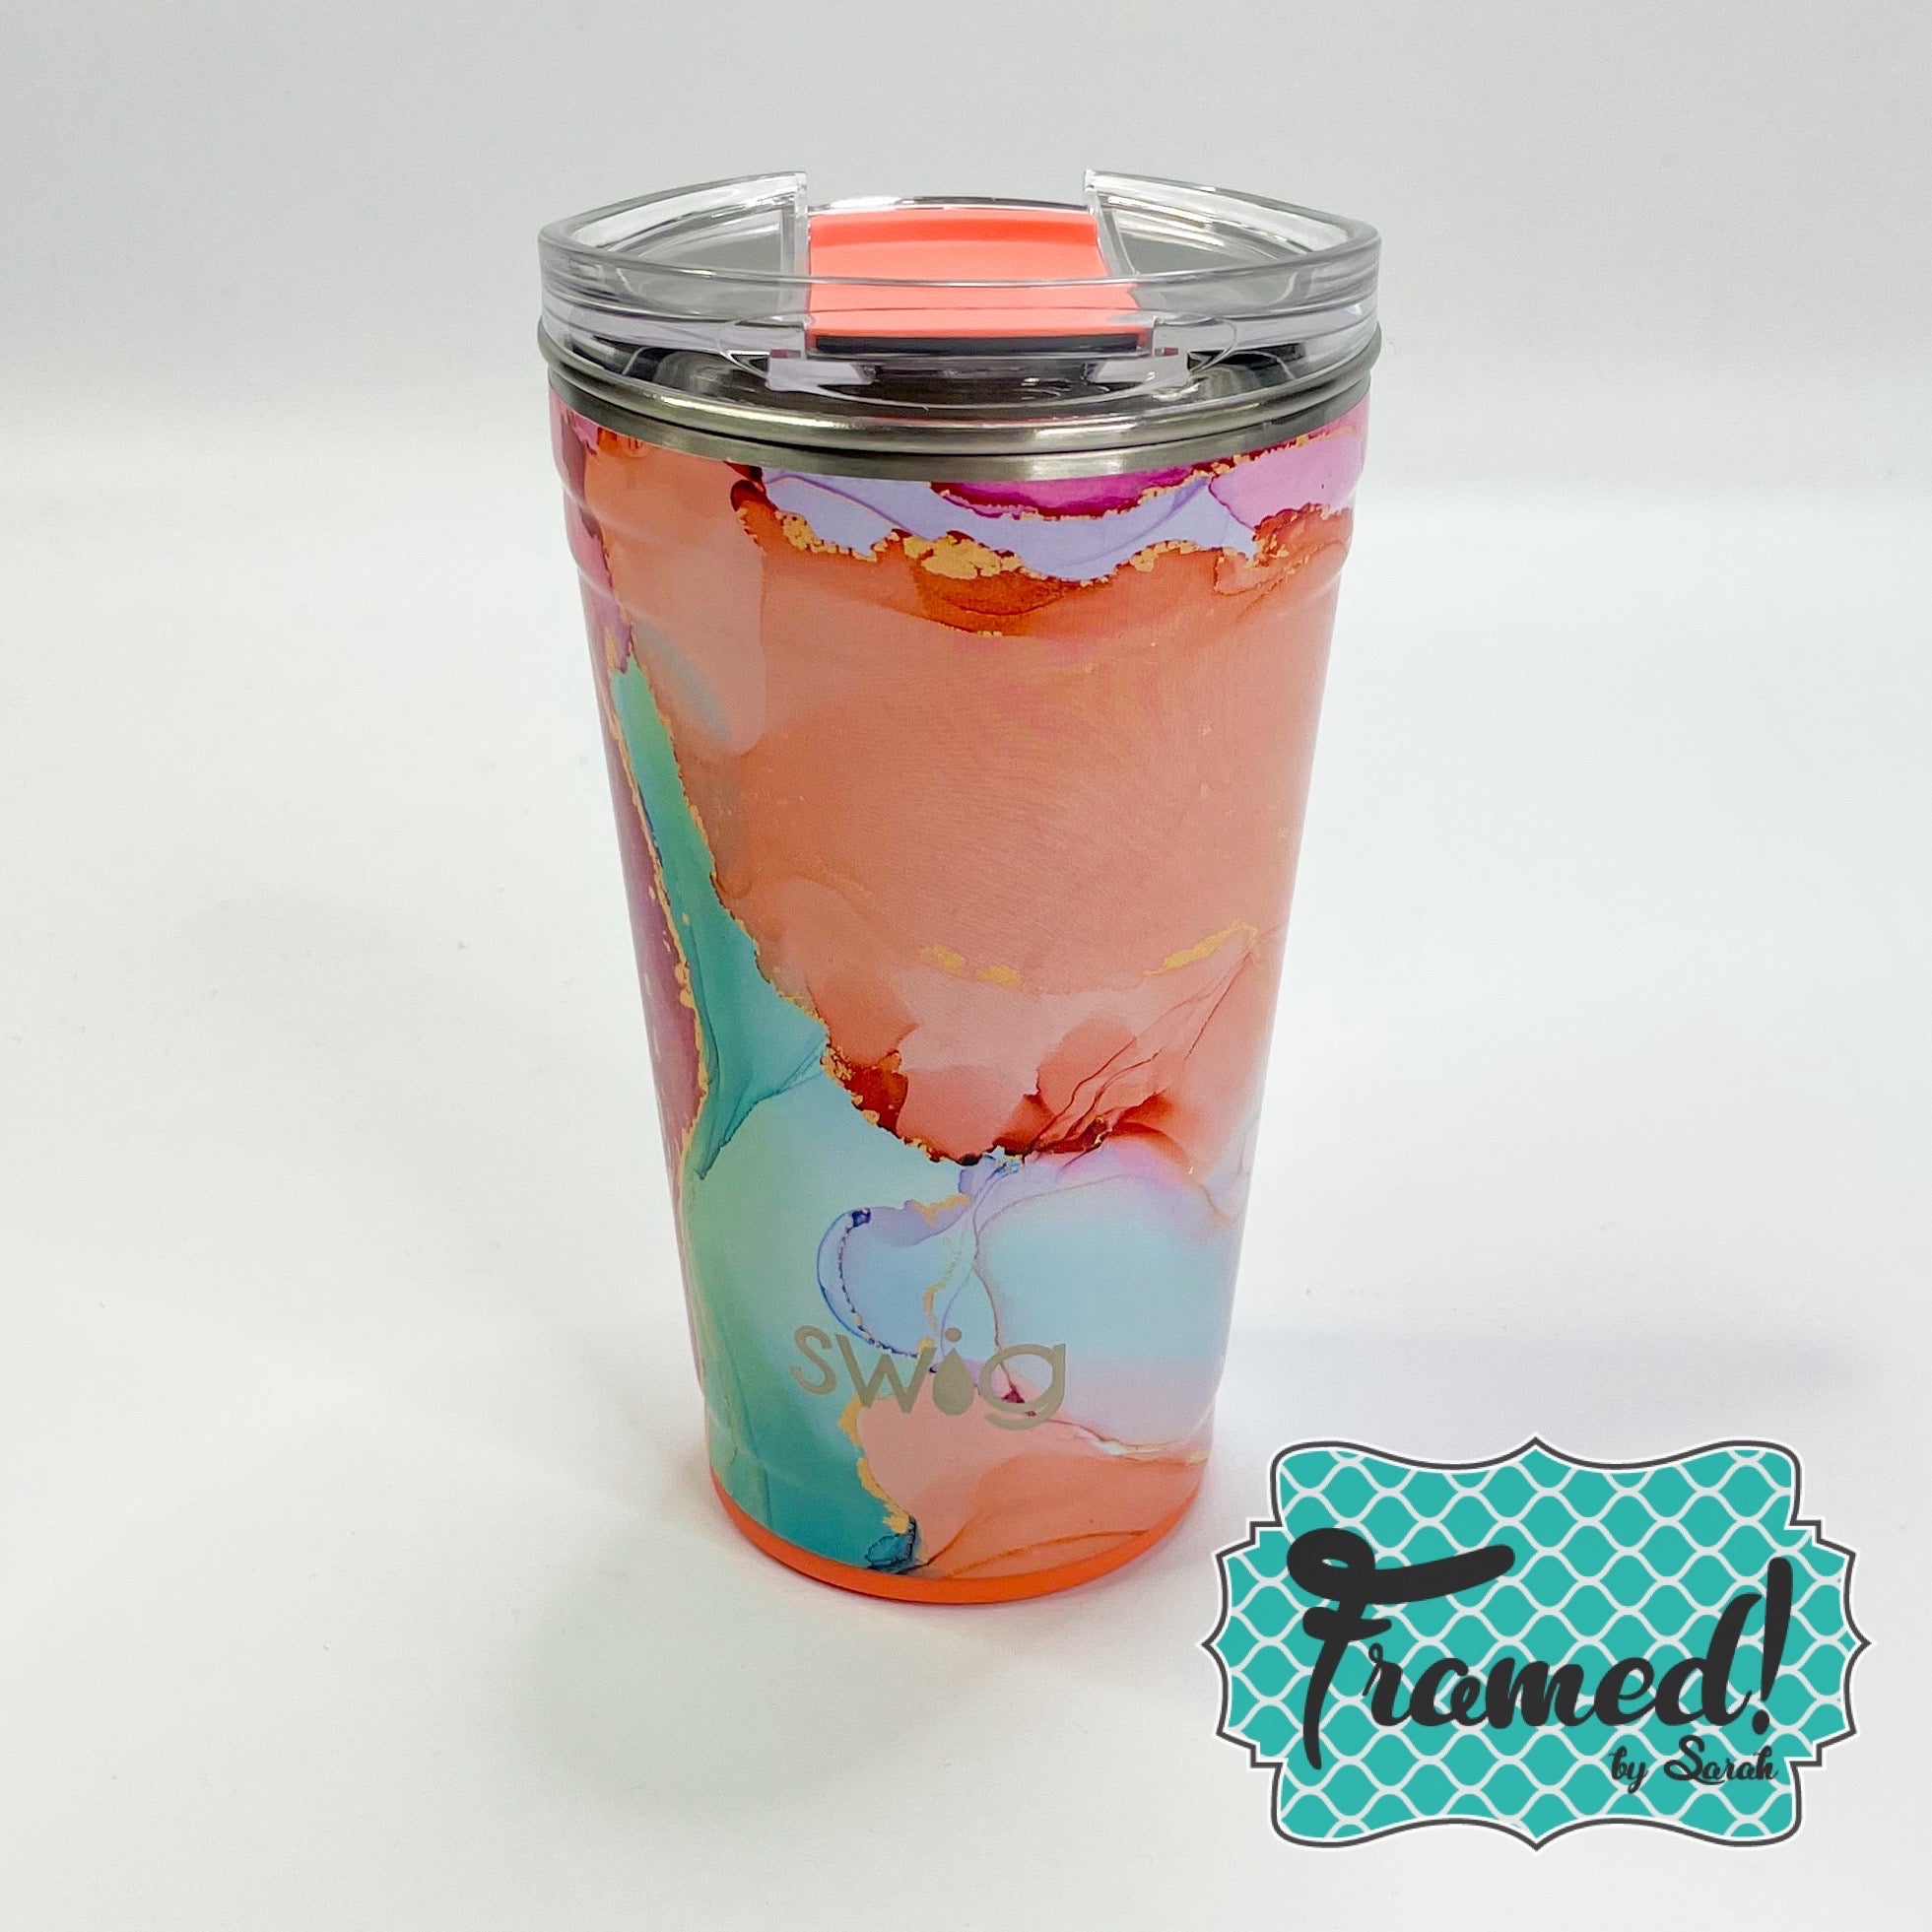 24 oz Swig Dreamsicle Party Cup